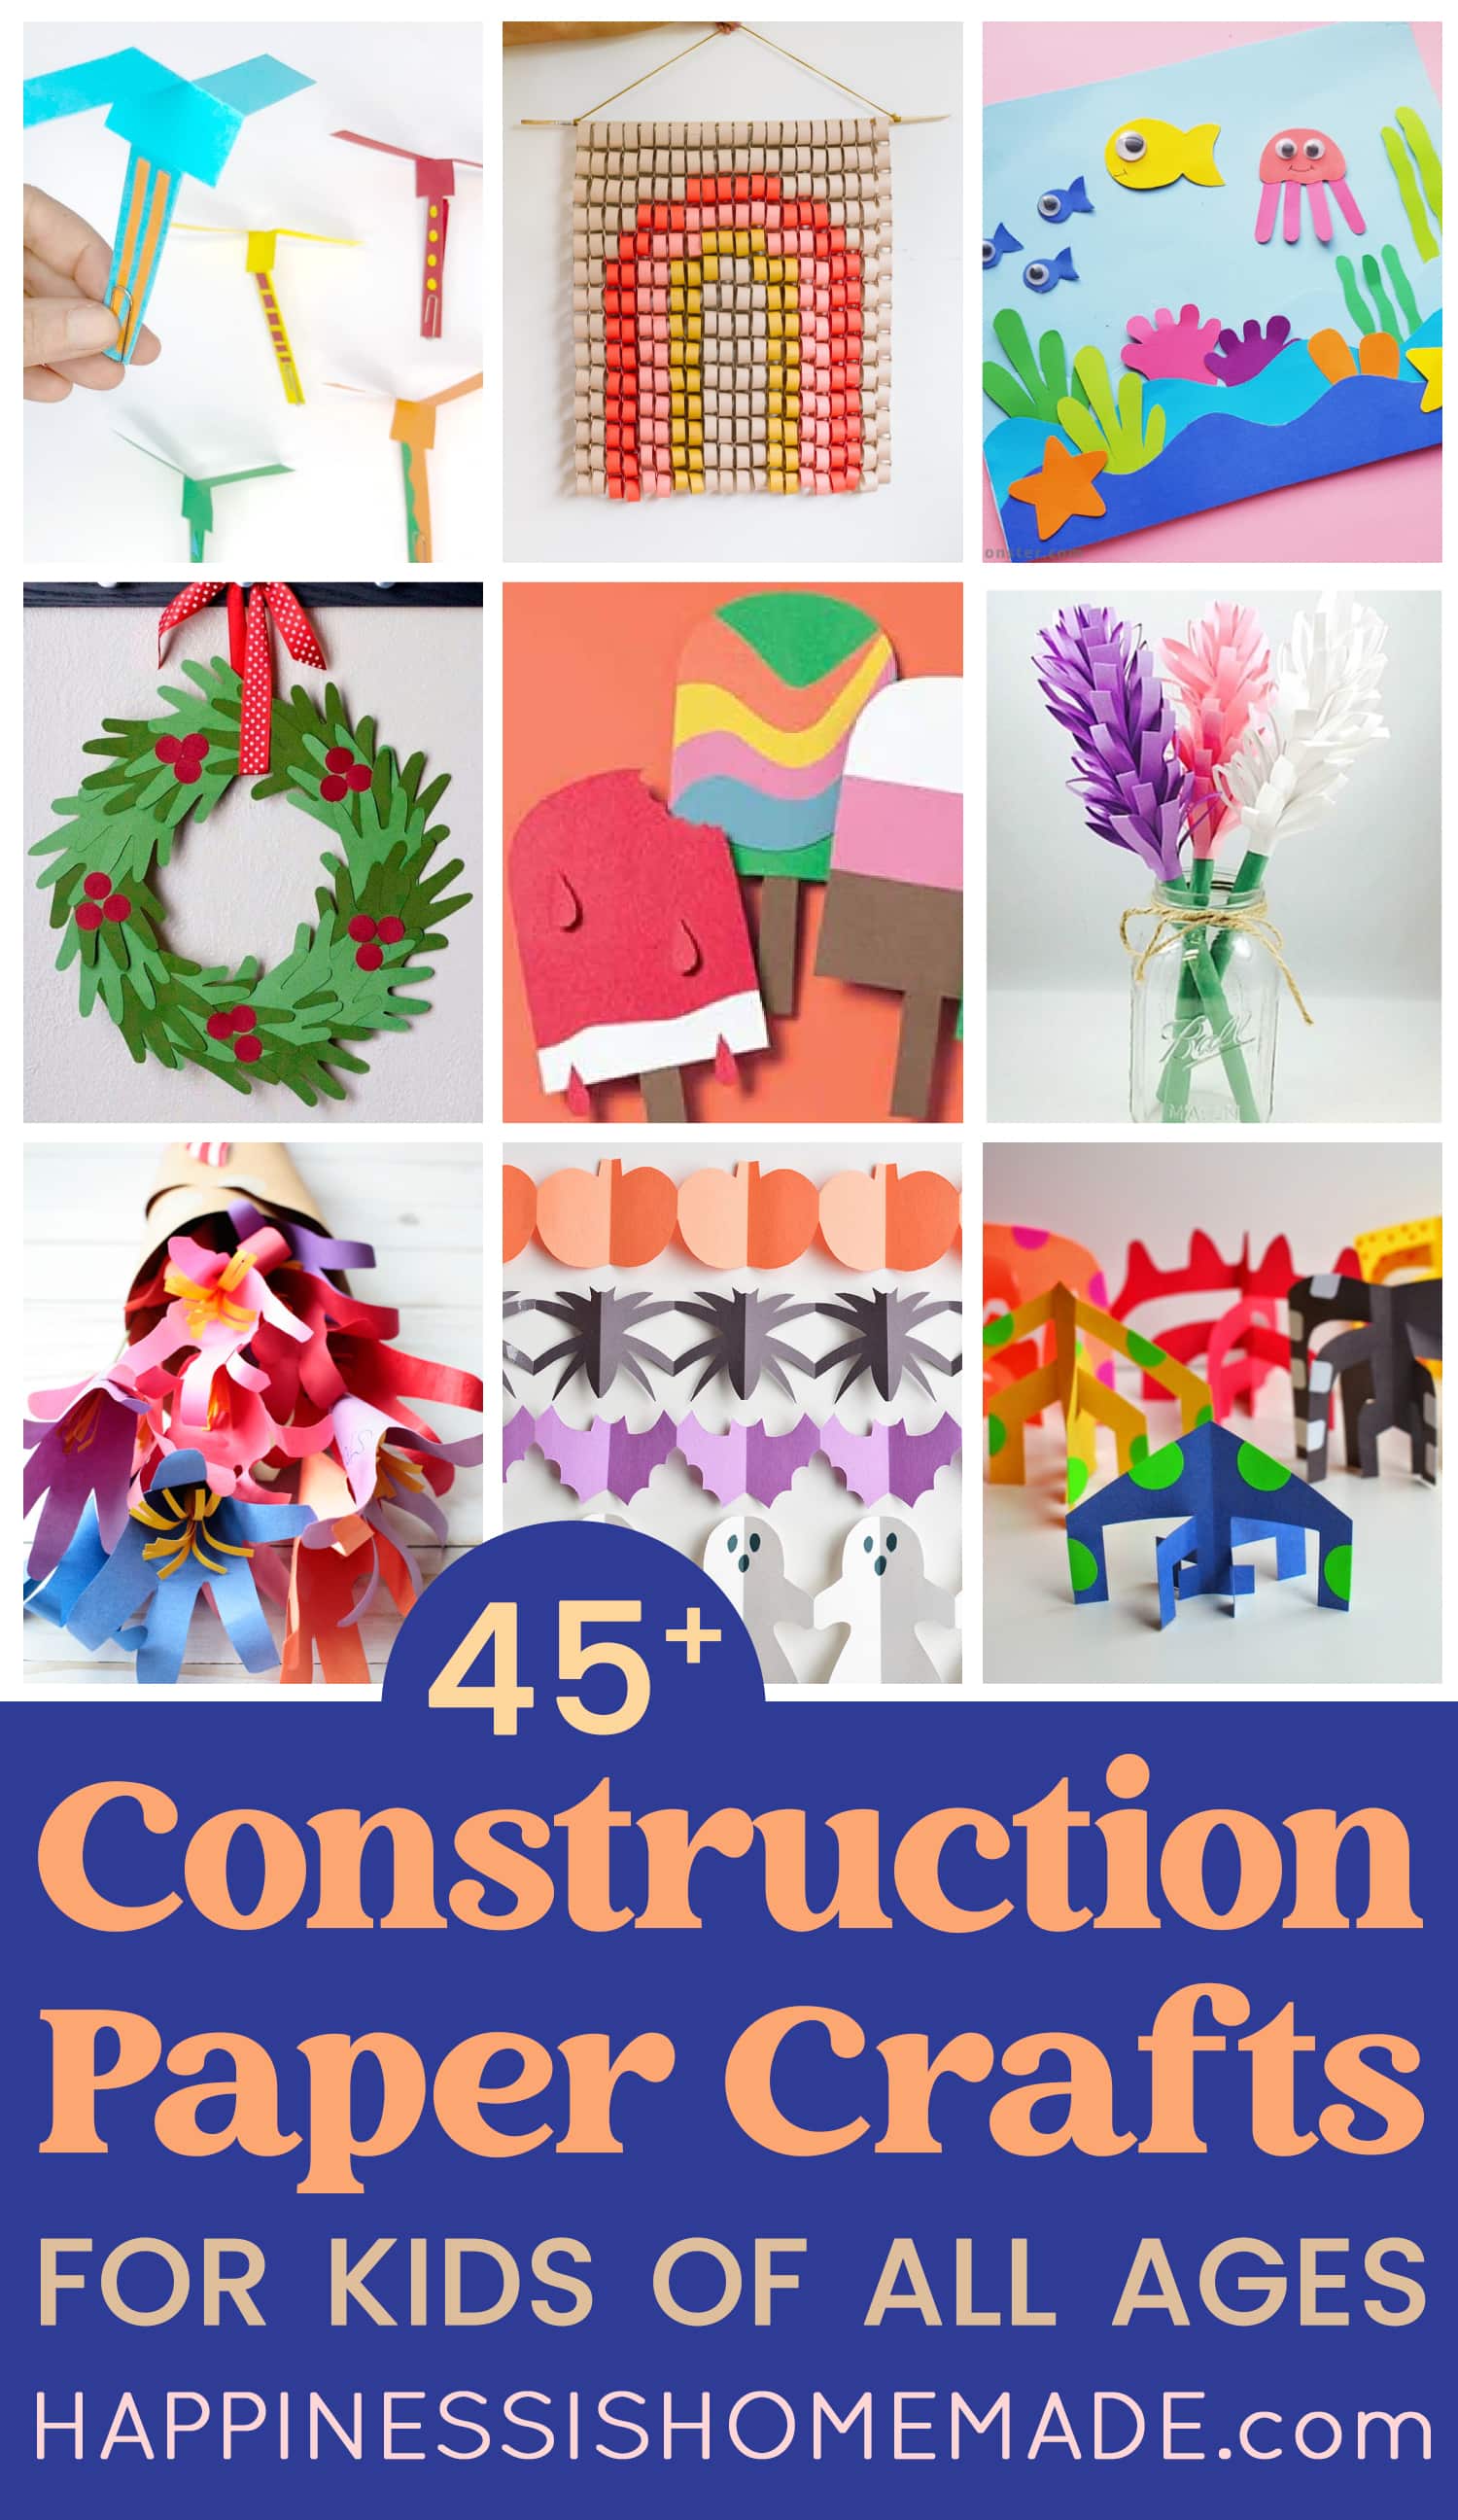 45+ Construction Paper Crafts for Kids - Happiness is Homemade